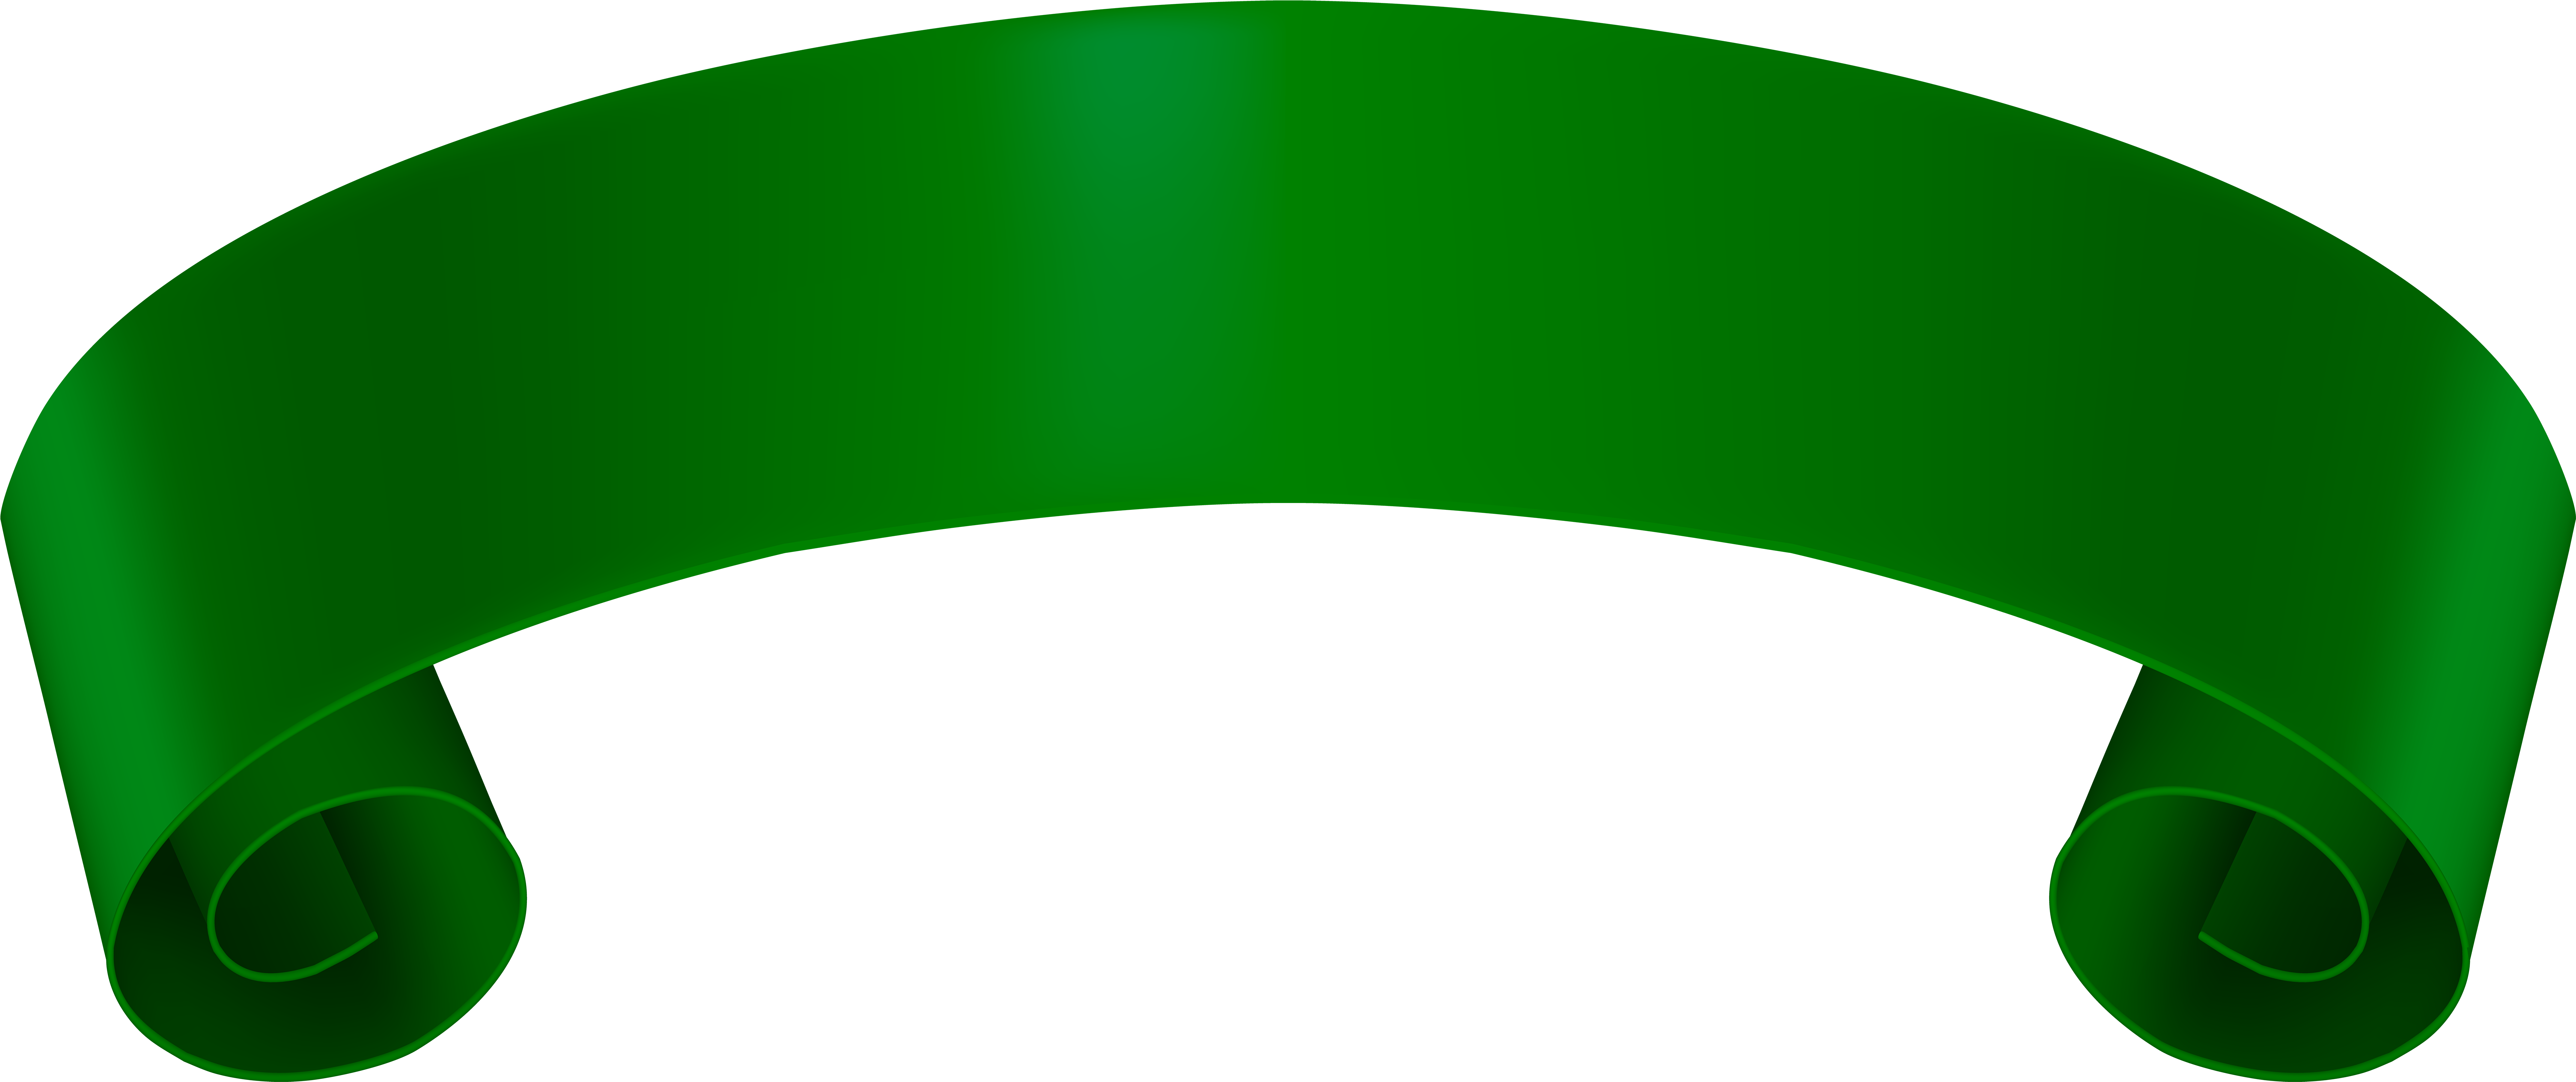 A Green Banner With Black Background